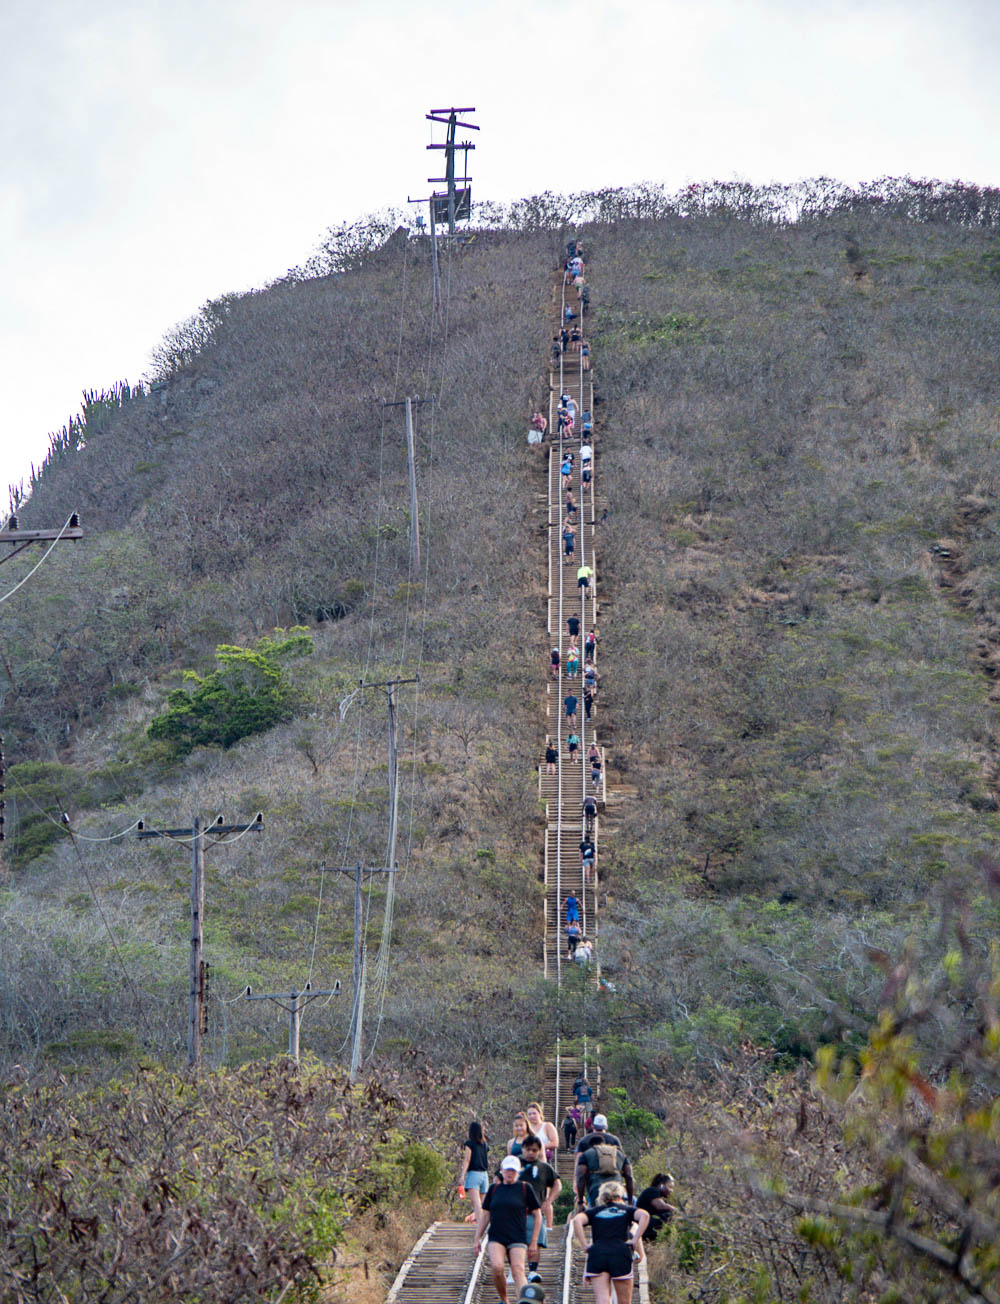 stairway going up the side of a mountain covered in hikers